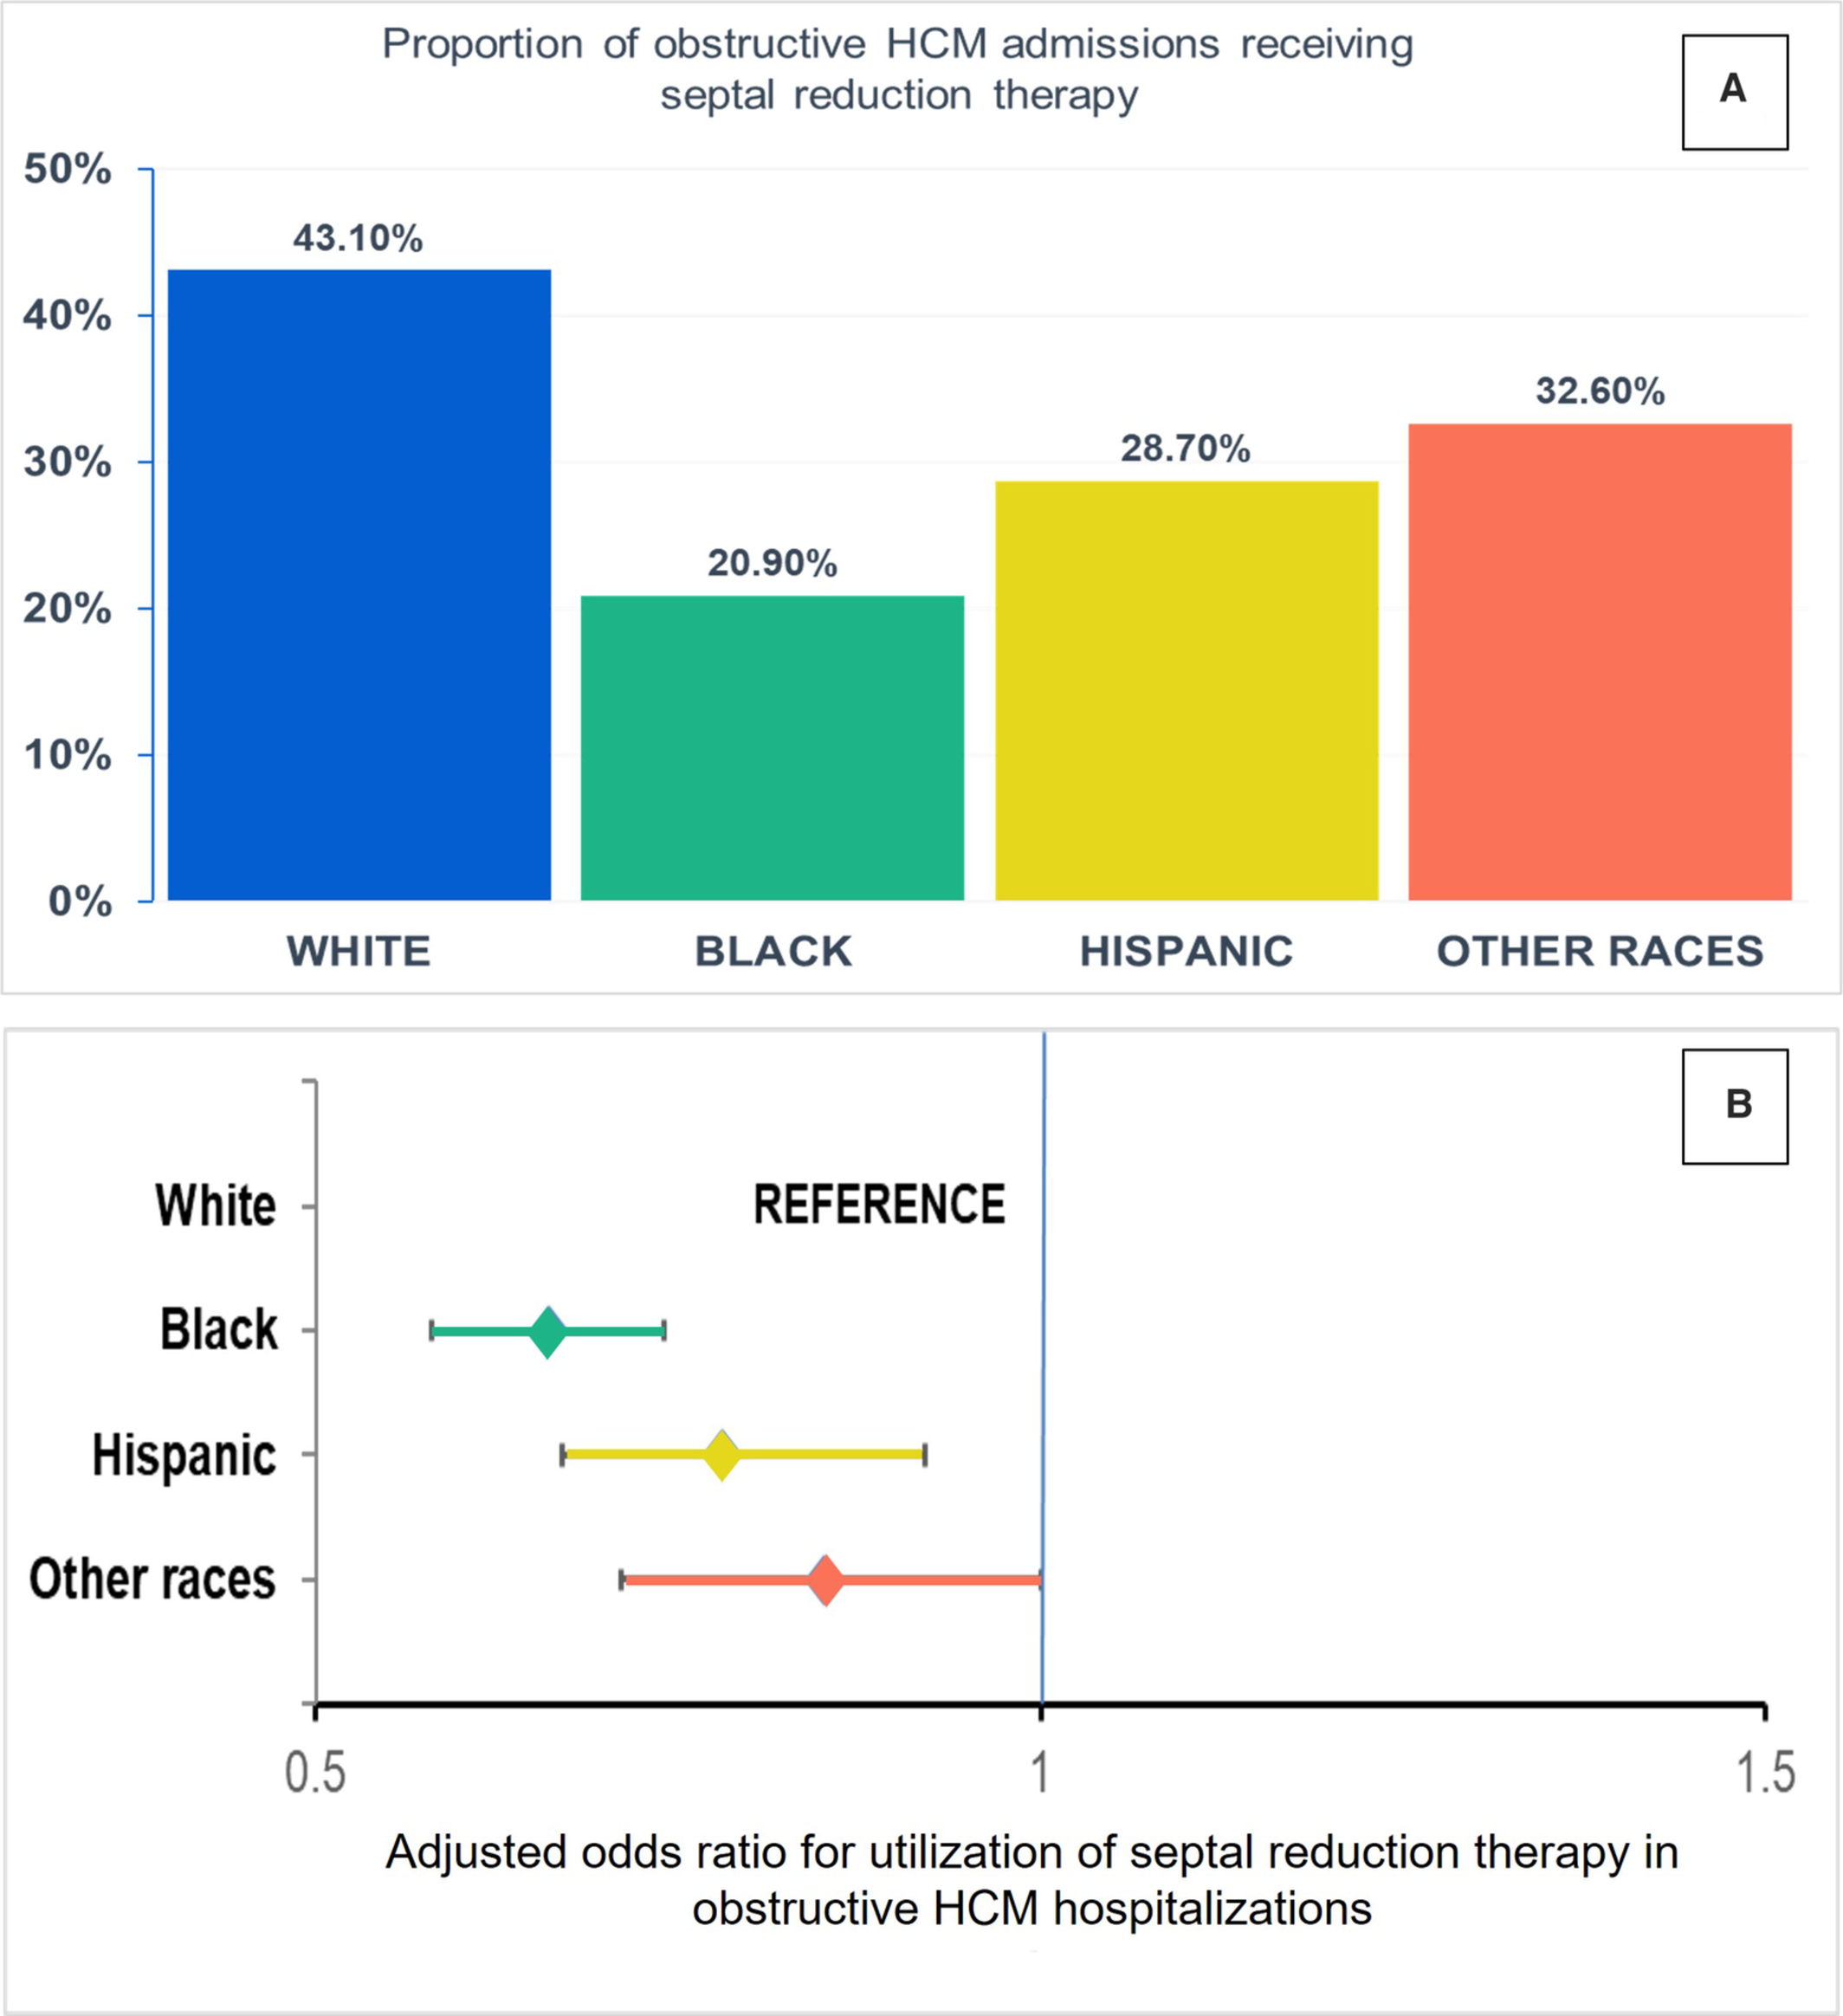 Impact of Race and Ethnicity on Use and Outcomes of Septal Reduction Therapies for Obstructive Hypertrophic Cardiomyopathy